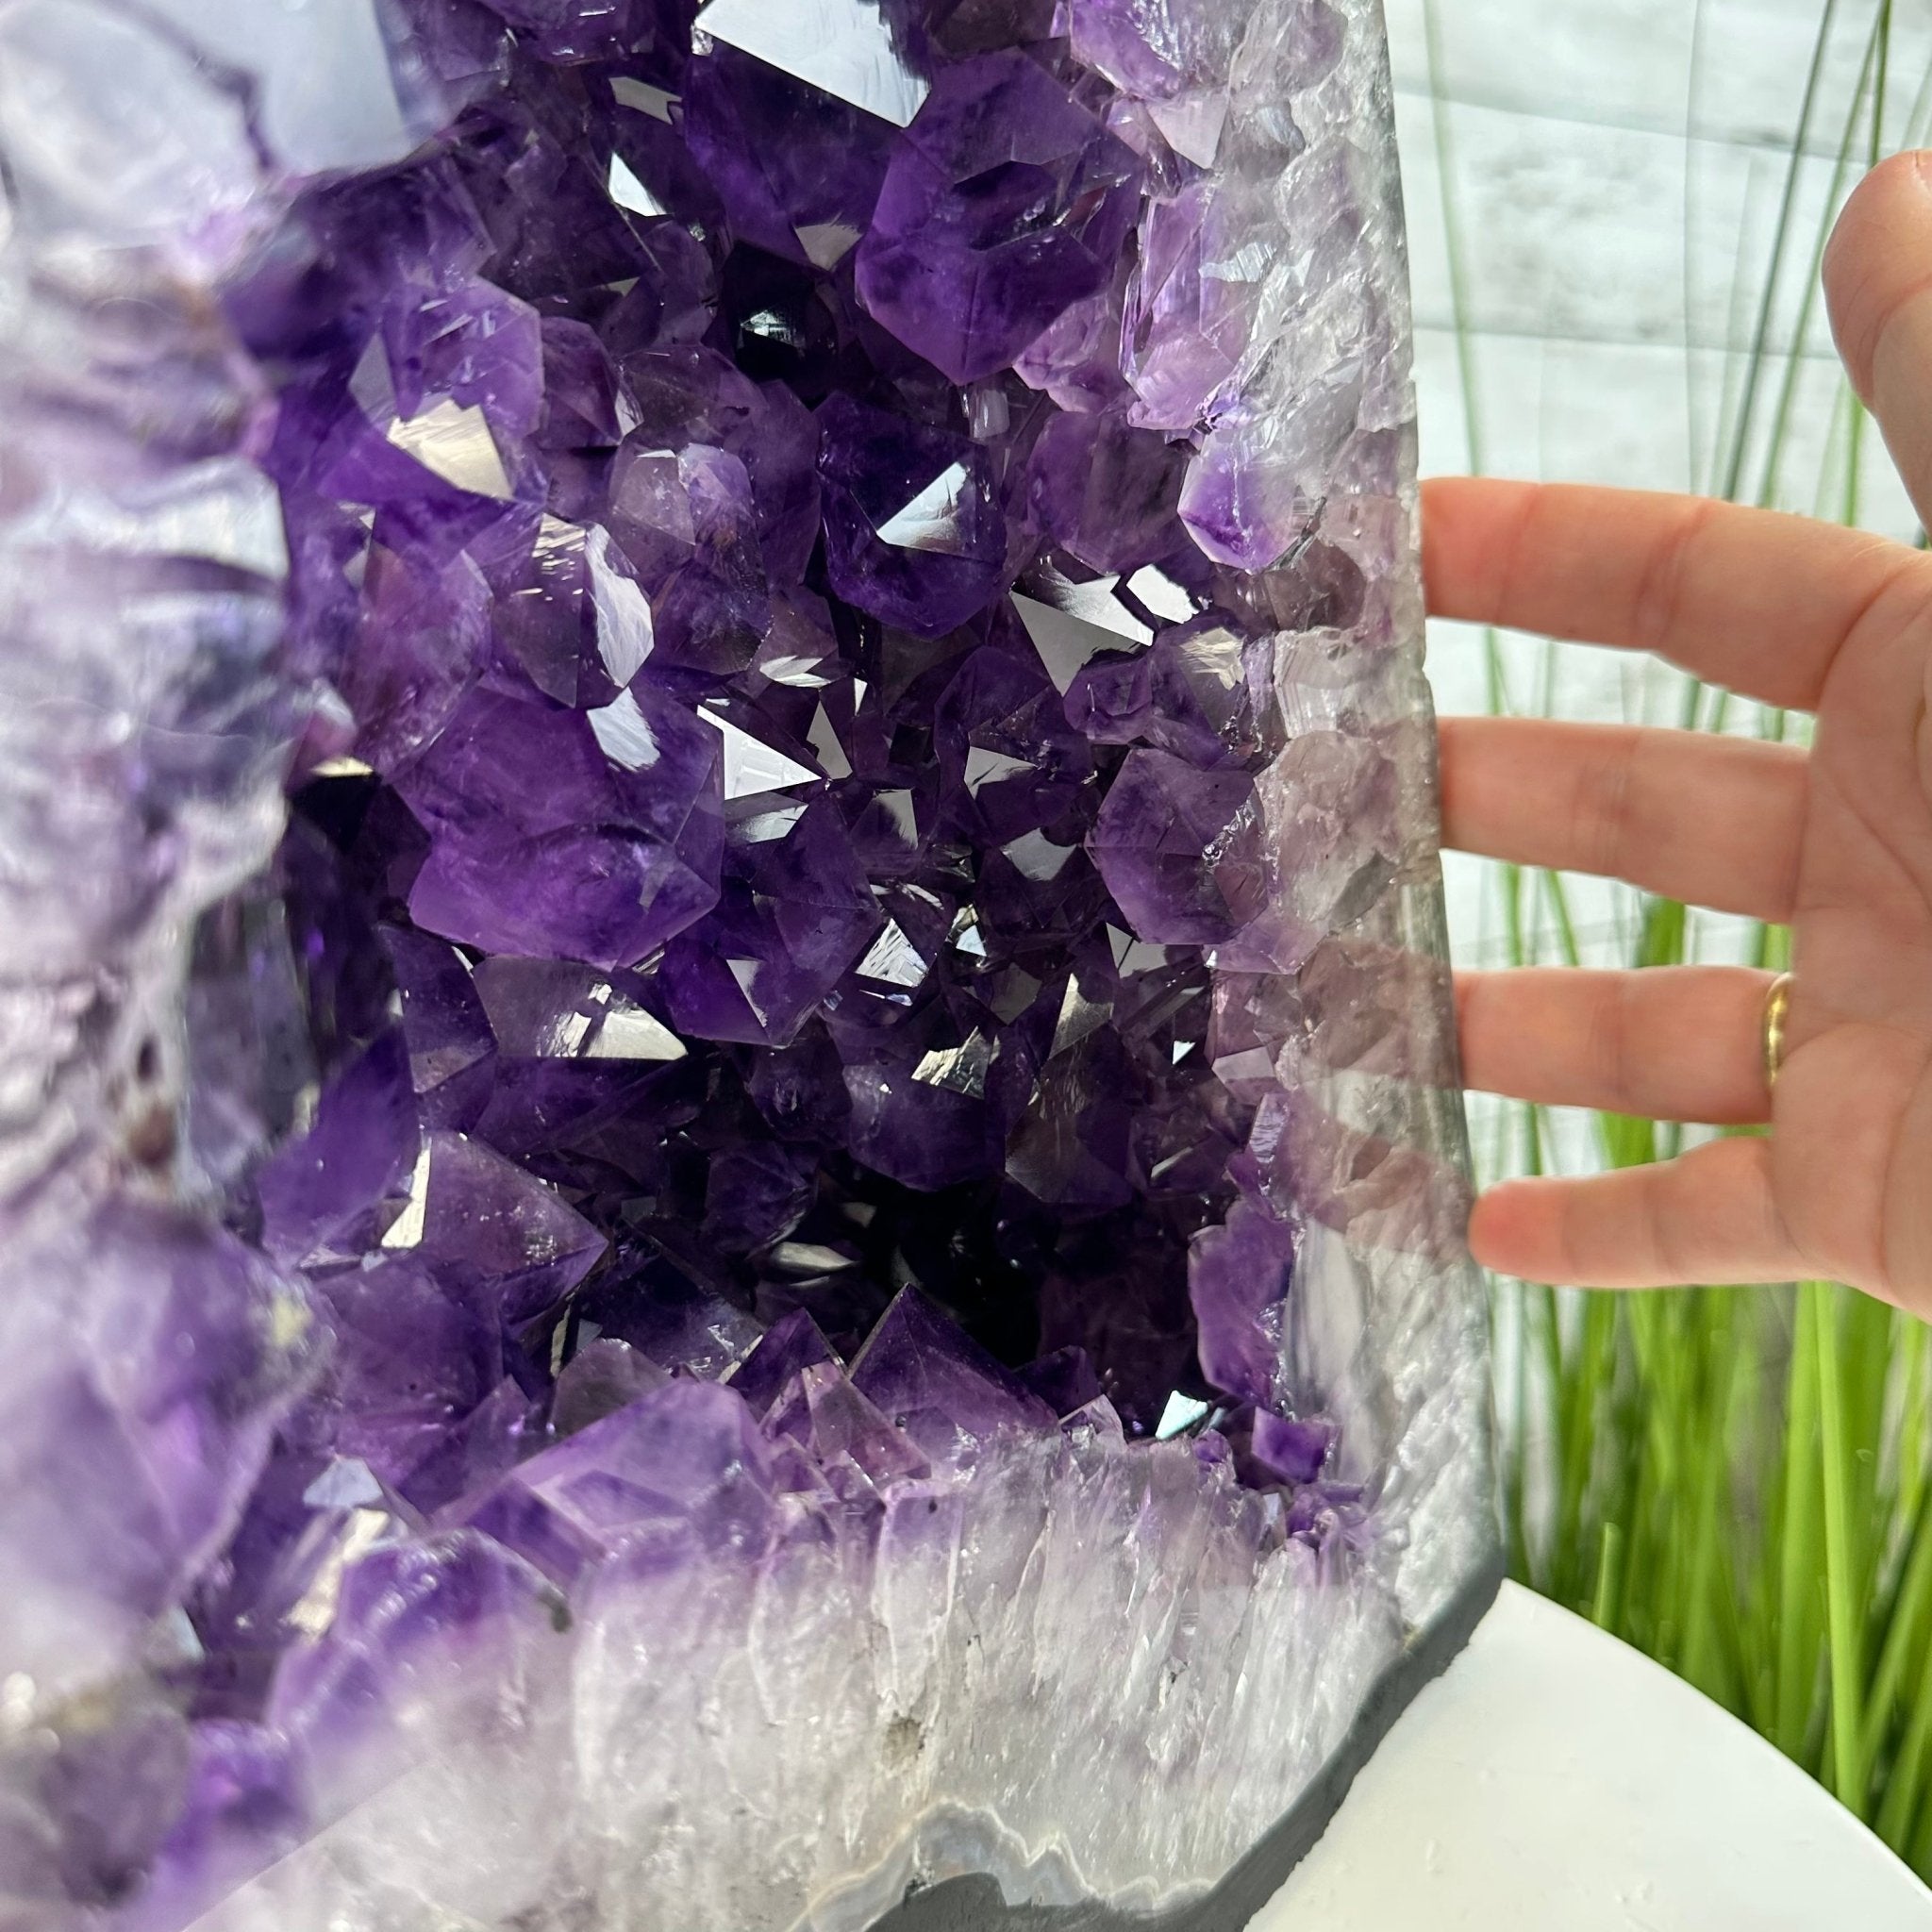 Super Quality Brazilian Amethyst Cathedral, 53.2 lbs & 19.7" Tall, Model #5601-1084 by Brazil Gems - Brazil GemsBrazil GemsSuper Quality Brazilian Amethyst Cathedral, 53.2 lbs & 19.7" Tall, Model #5601-1084 by Brazil GemsCathedrals5601-1084